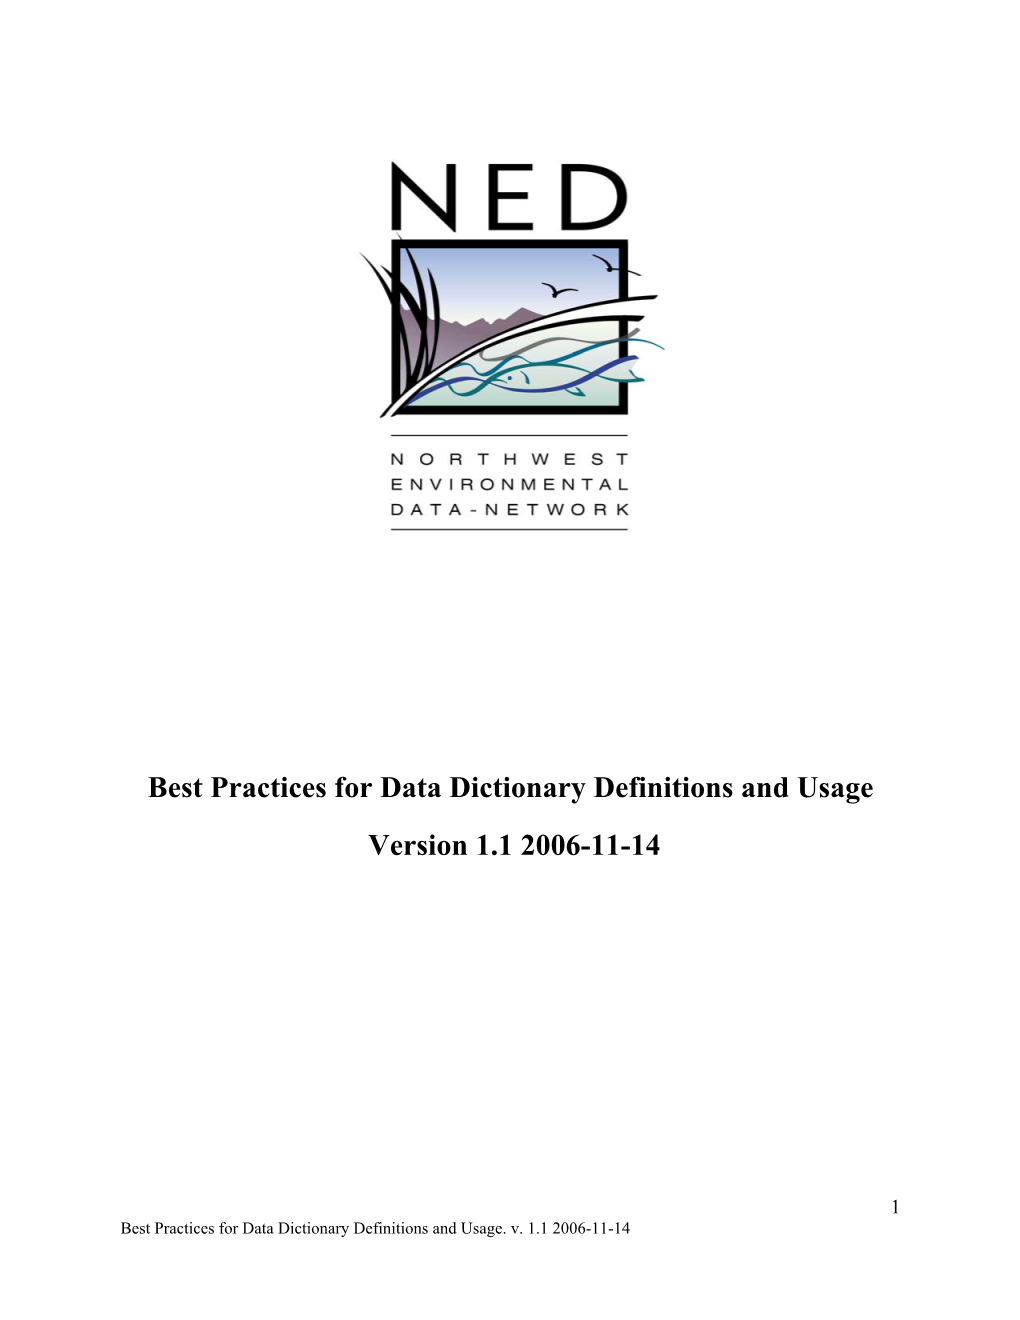 Best Practices for Data Dictionary Definitions and Usage Version 1.1 2006-11-14